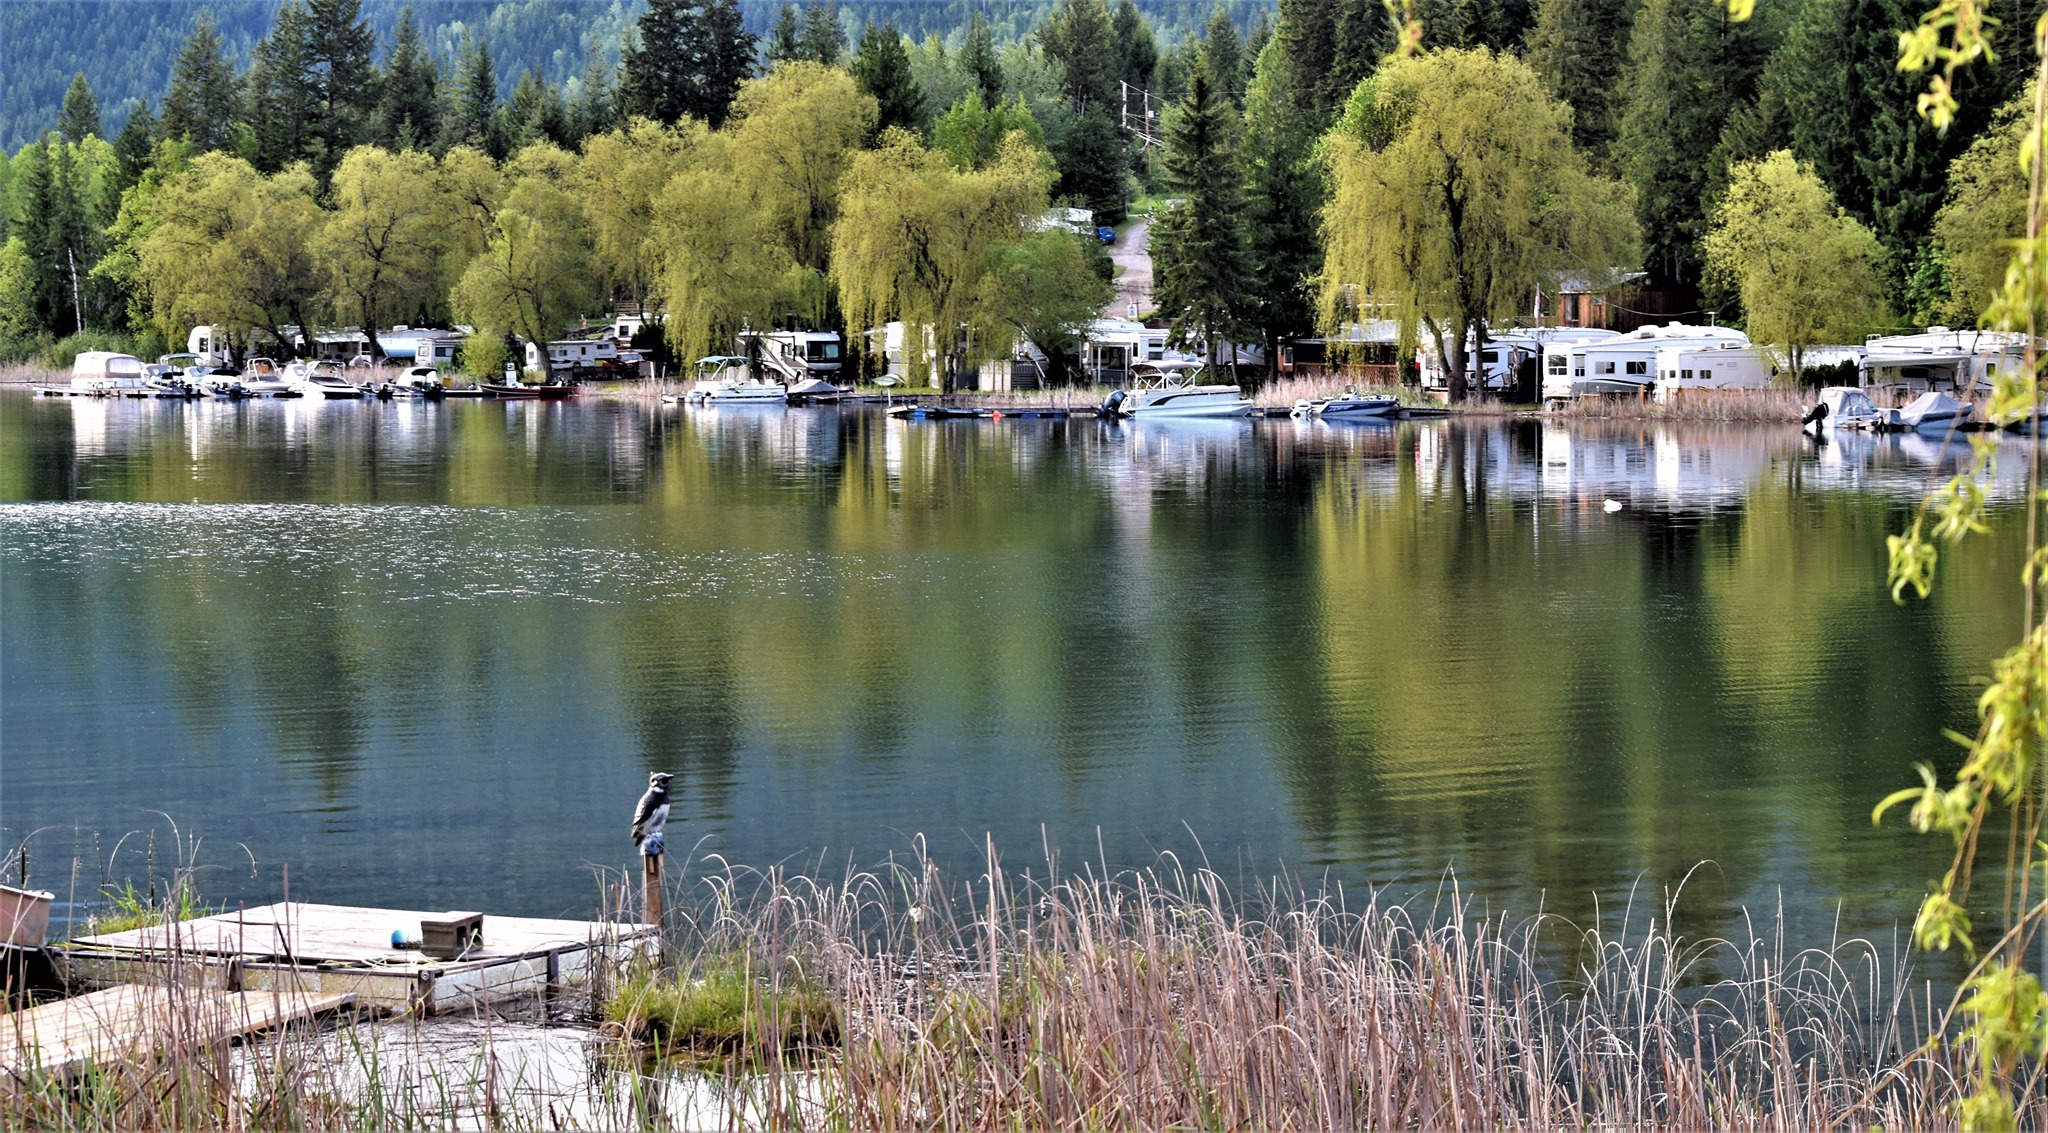 White Lake RV and Fishing Resort: White Lake RV and Fishing Resort features serviced RV lots, rental cabins, and a fishing lodge in a pleasant, family atmosphere. Resort amenities include: 38 Serviced RV Campsites, 10 Cabins – 4 […]